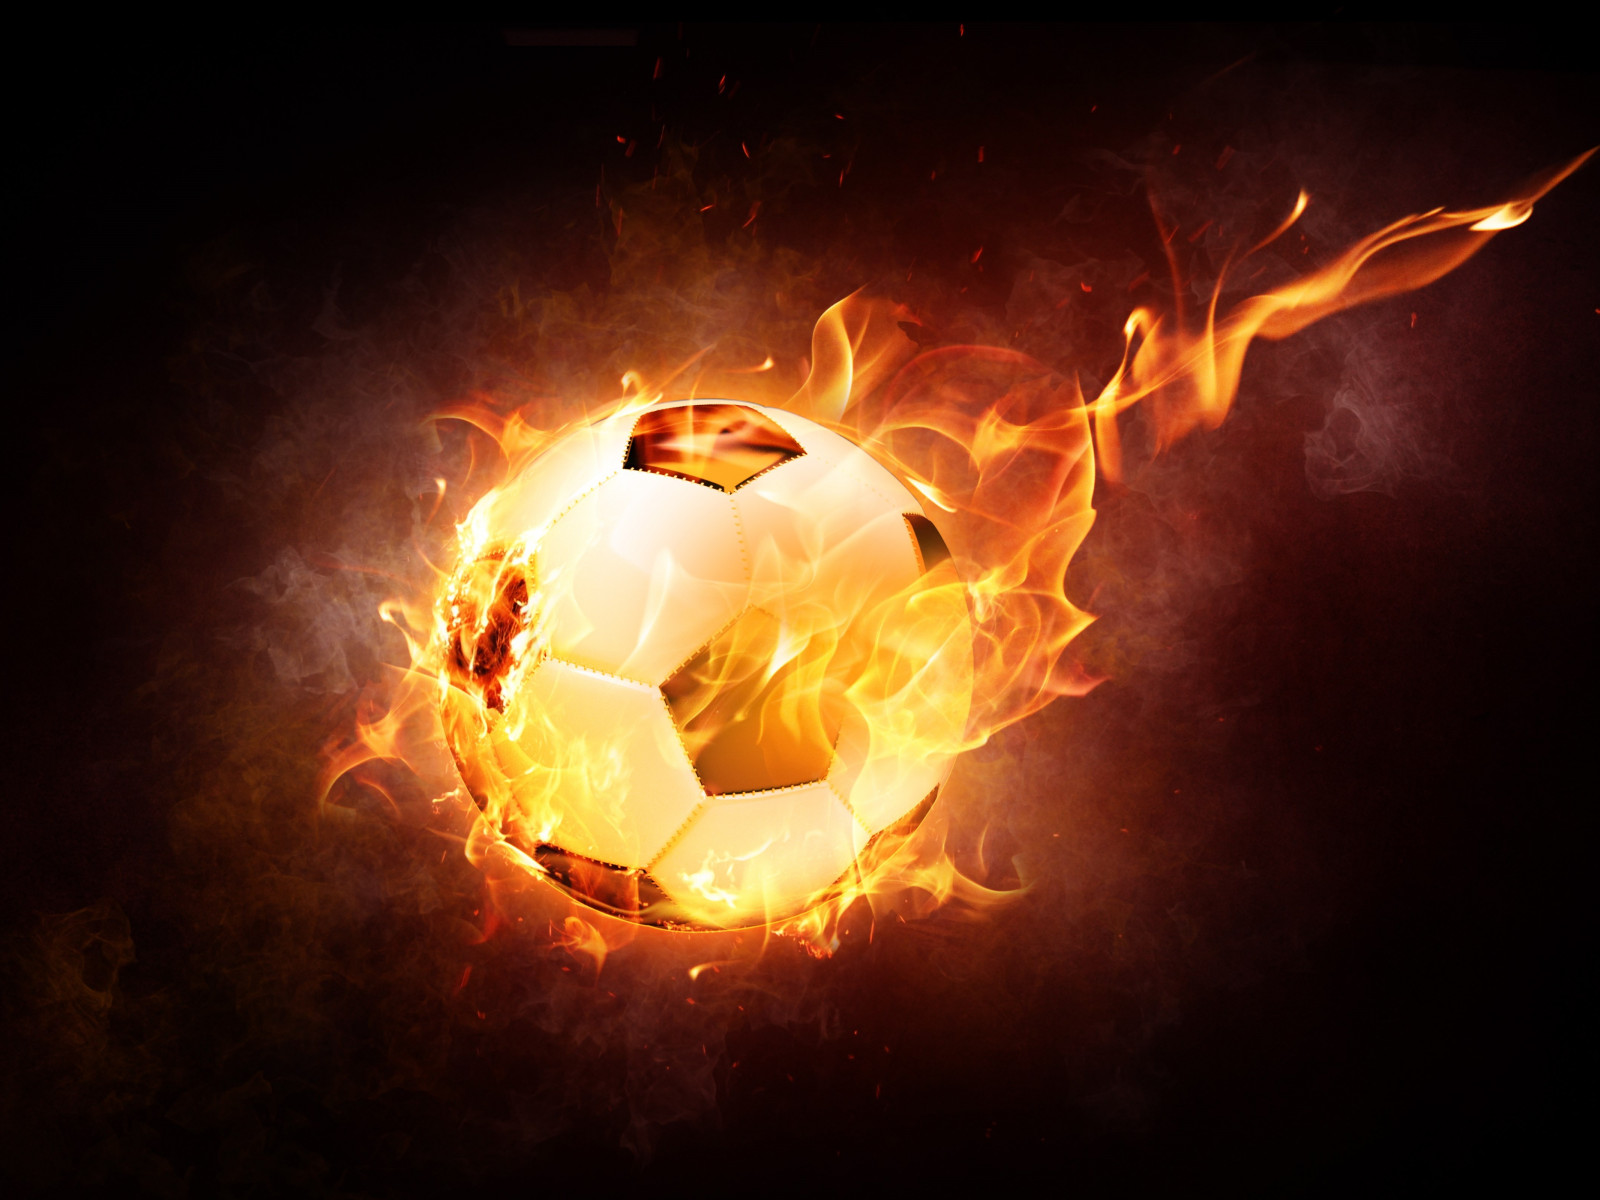 The football ball is on fire wallpaper 1600x1200